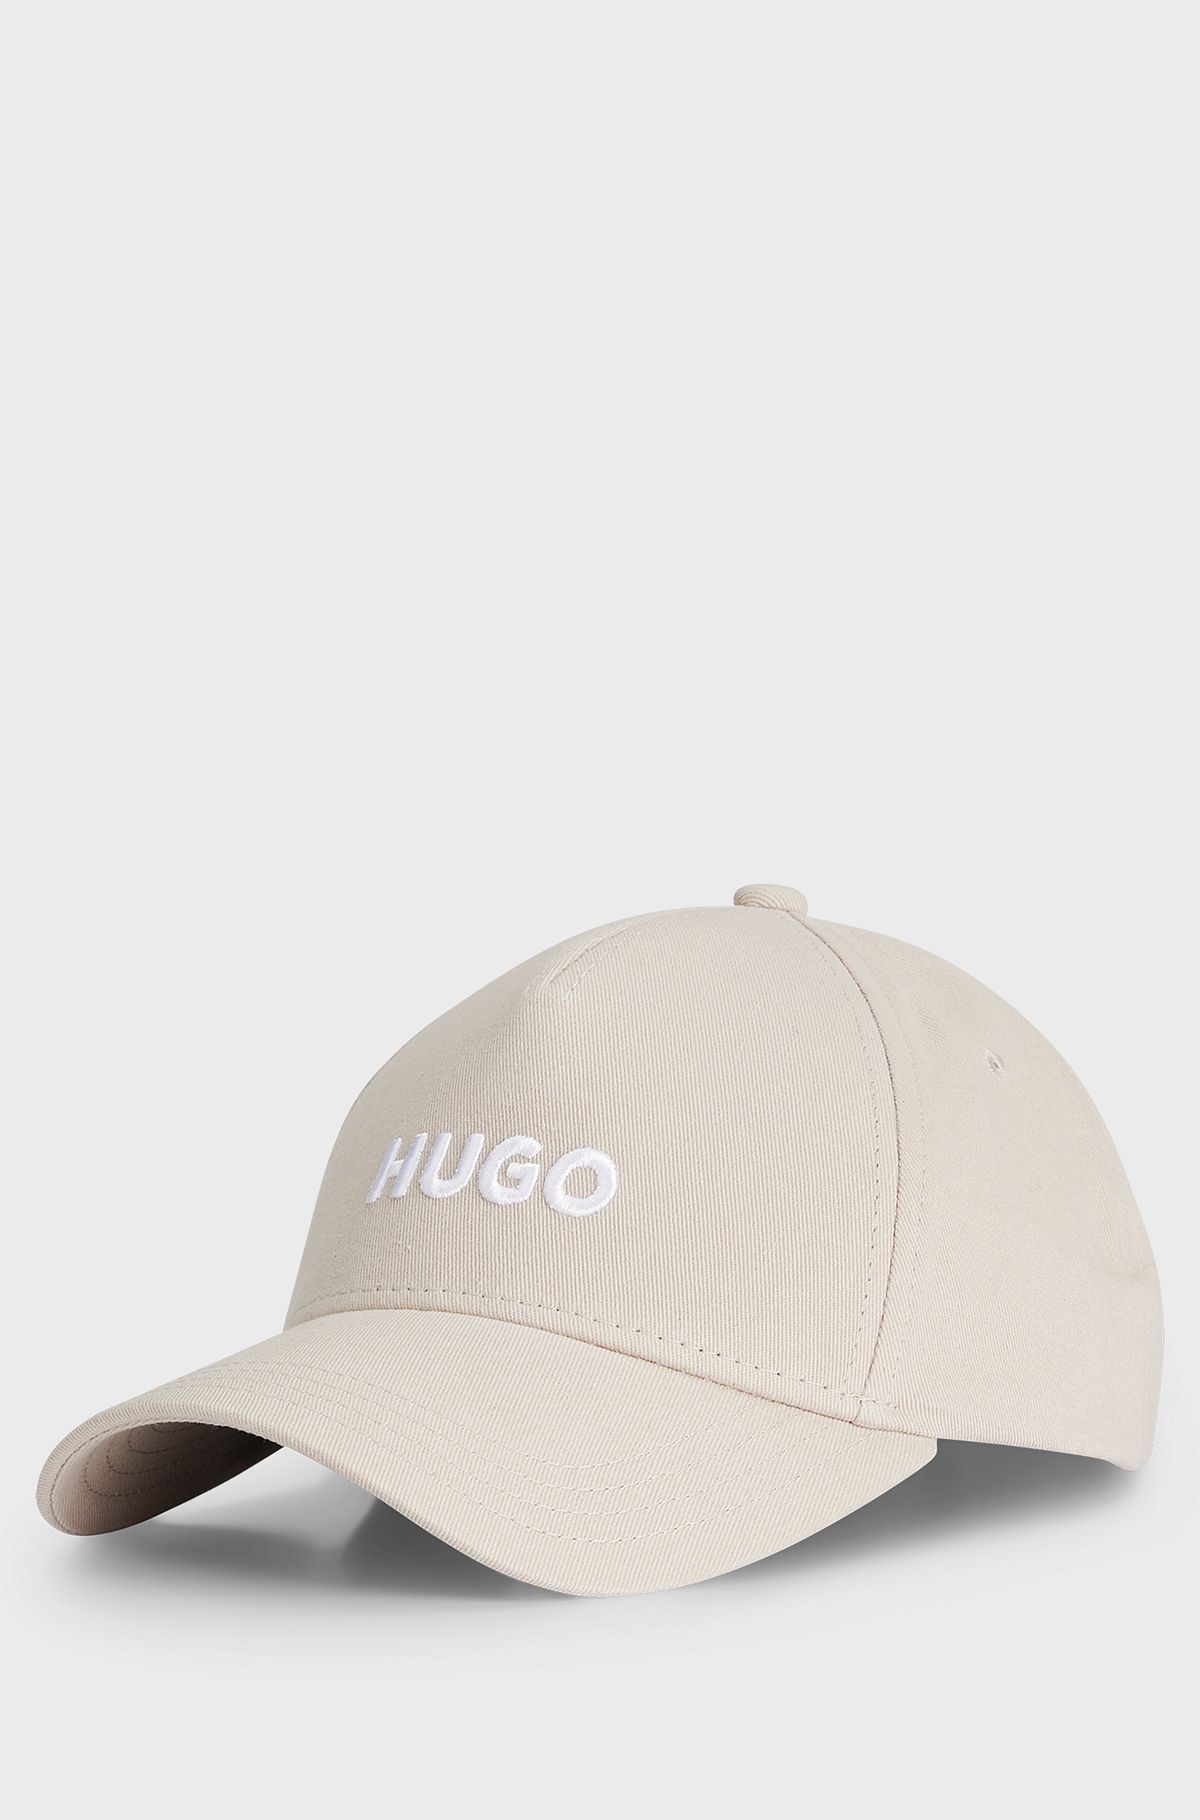 Cotton-twill cap with embroidered logo and snap closure, Light Beige